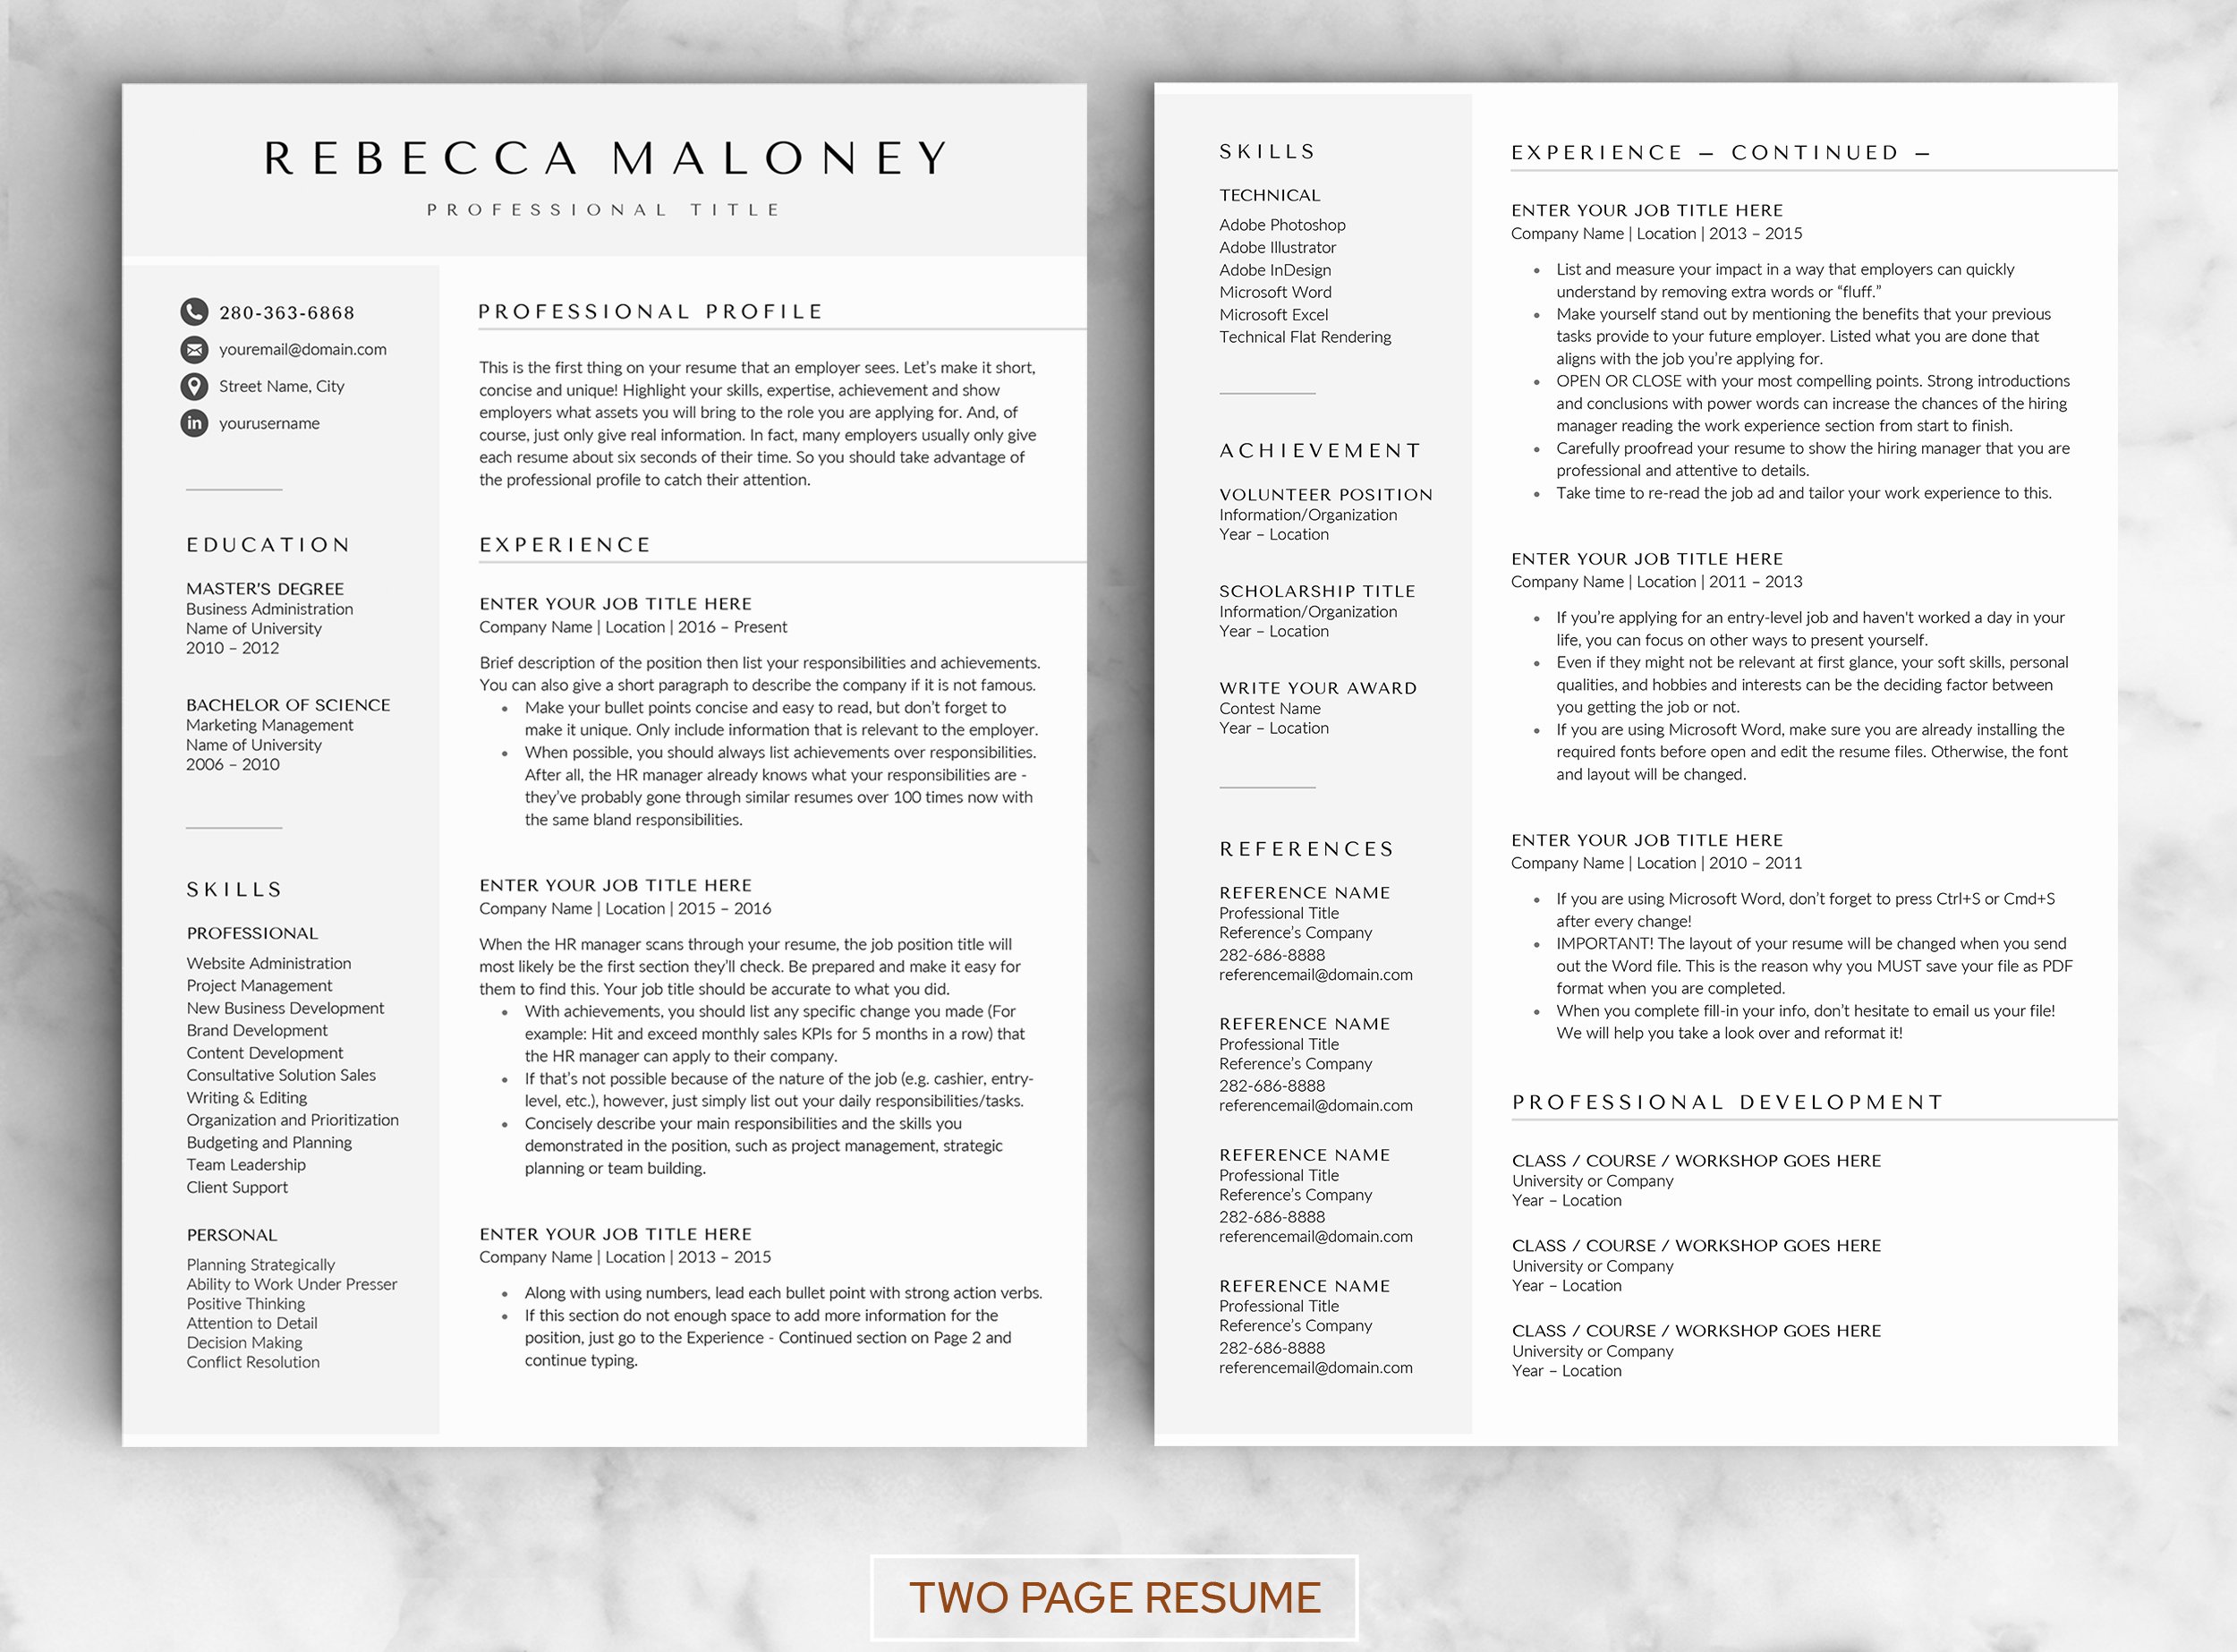 Professional resume template with two pages.